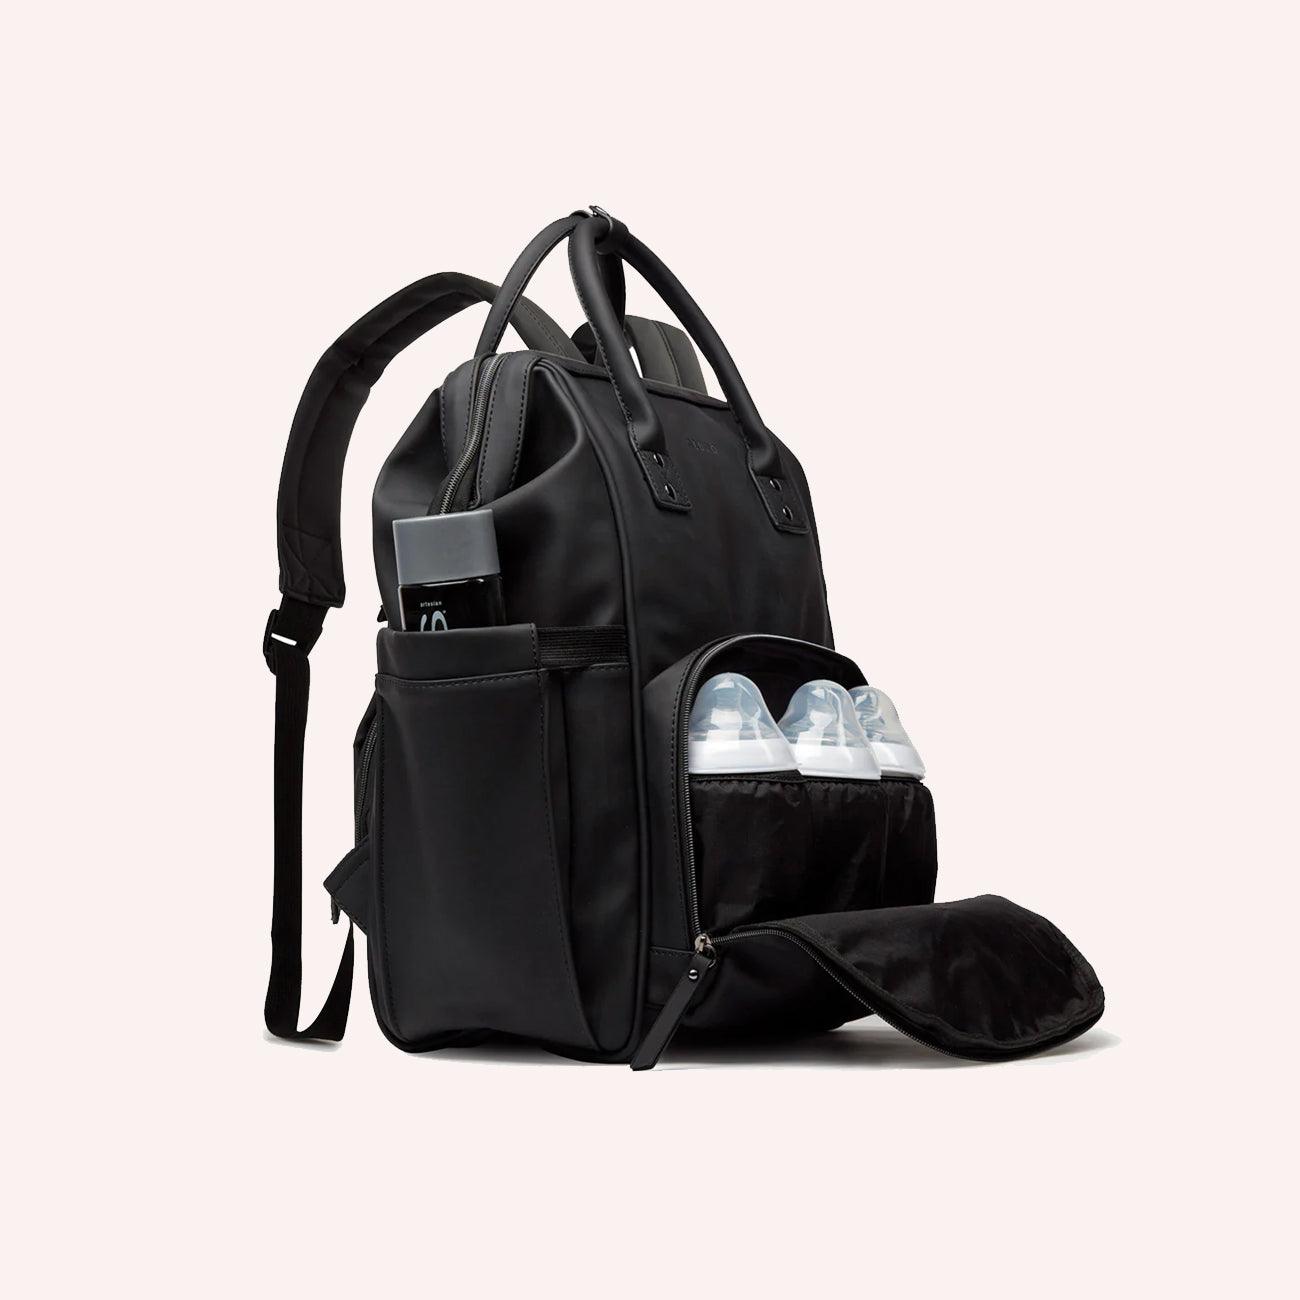 Active X Unisex Baby Backpack - Black